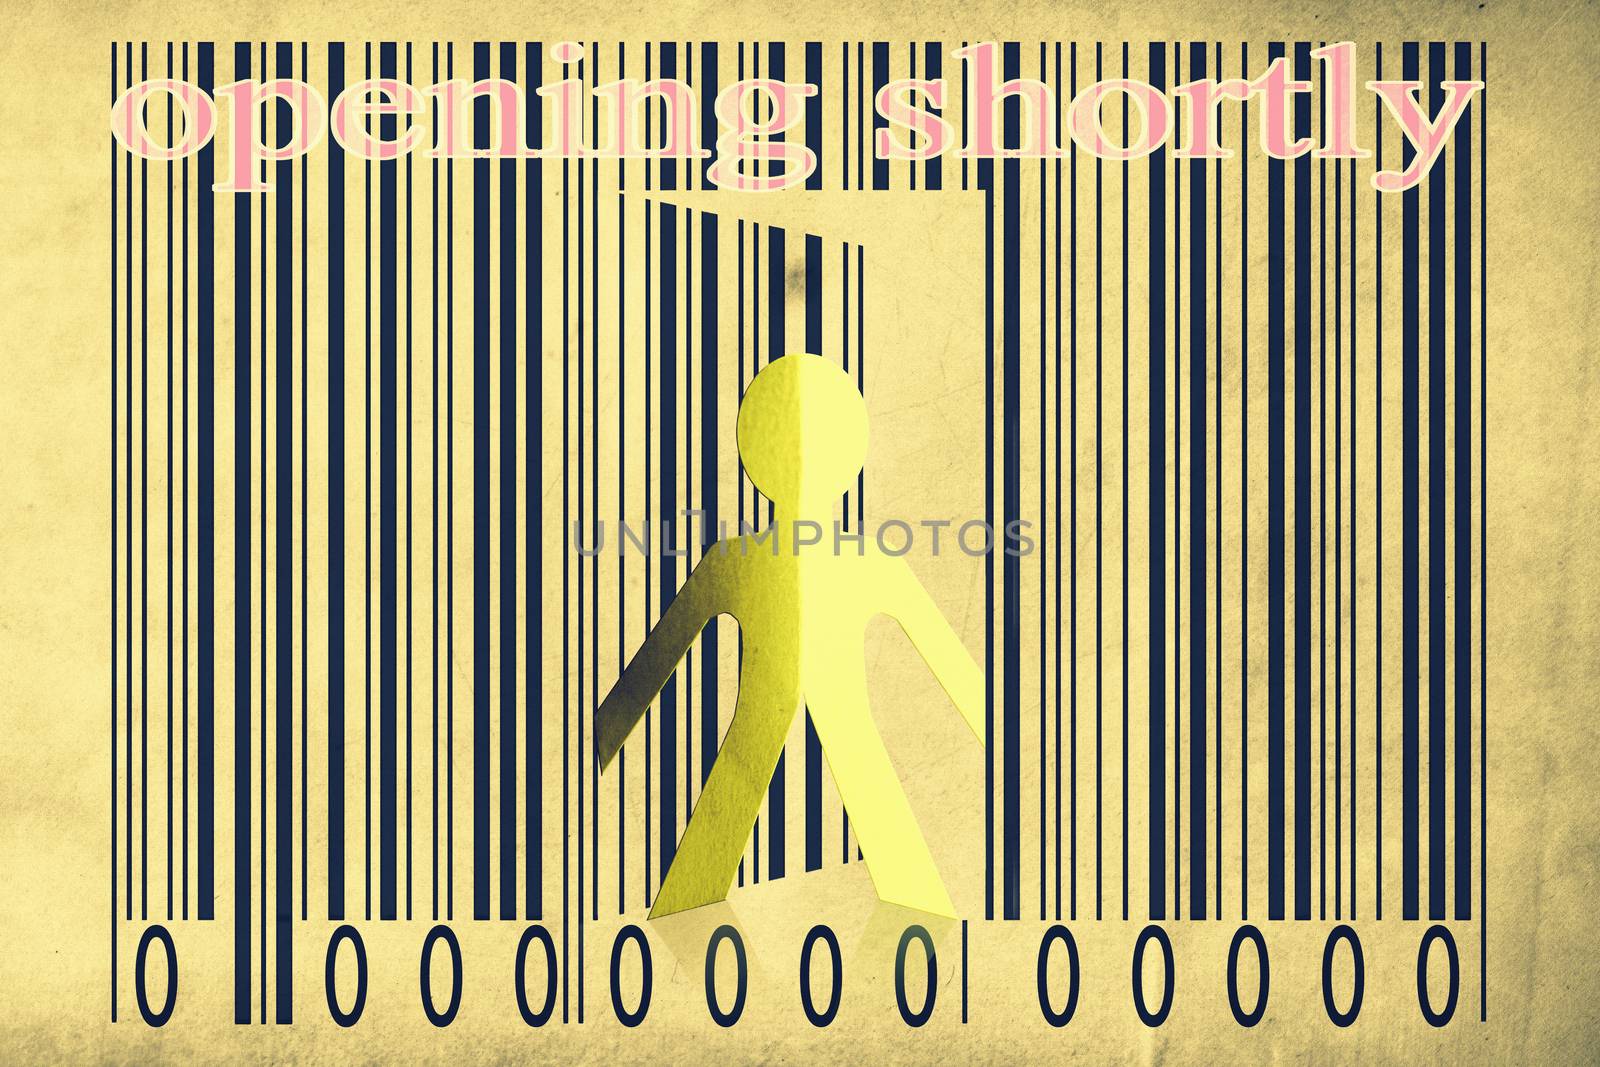 Paperman coming out of a bar code with Opening shortly Words by yands